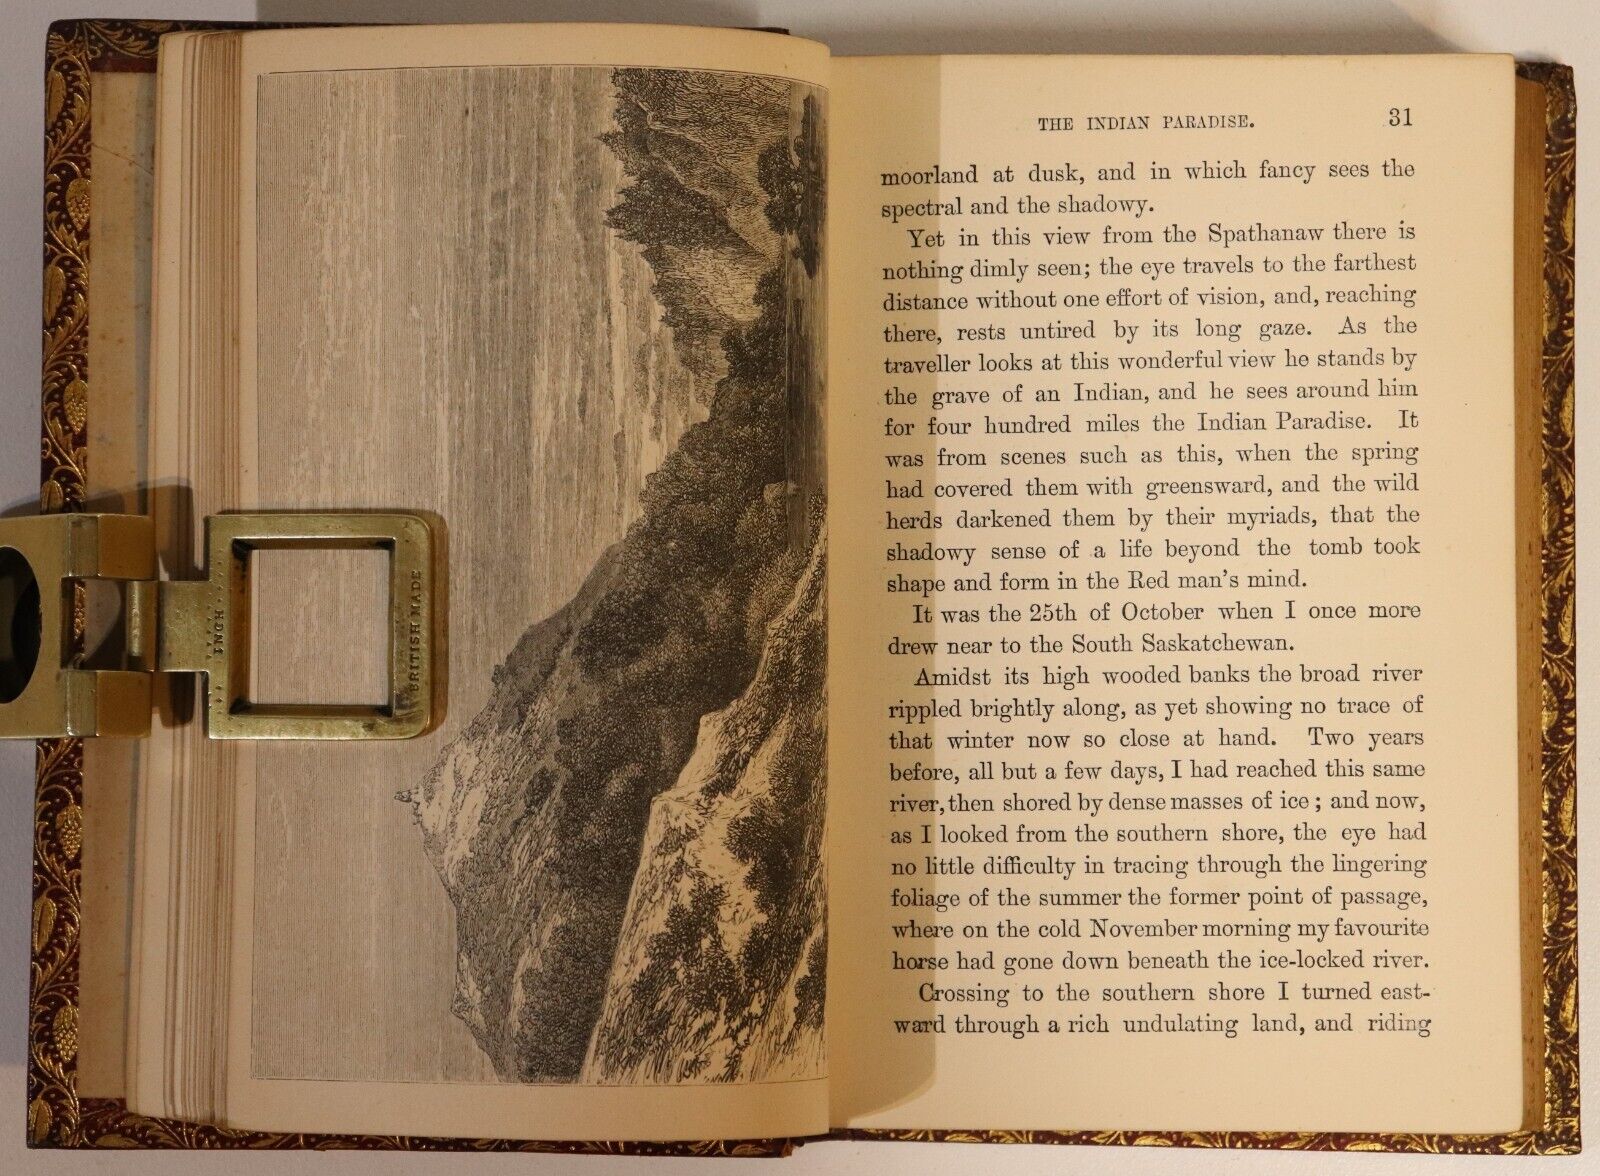 The Wild North Land by W.F. Butler - 1884 - Antique Exploration Adventure Book